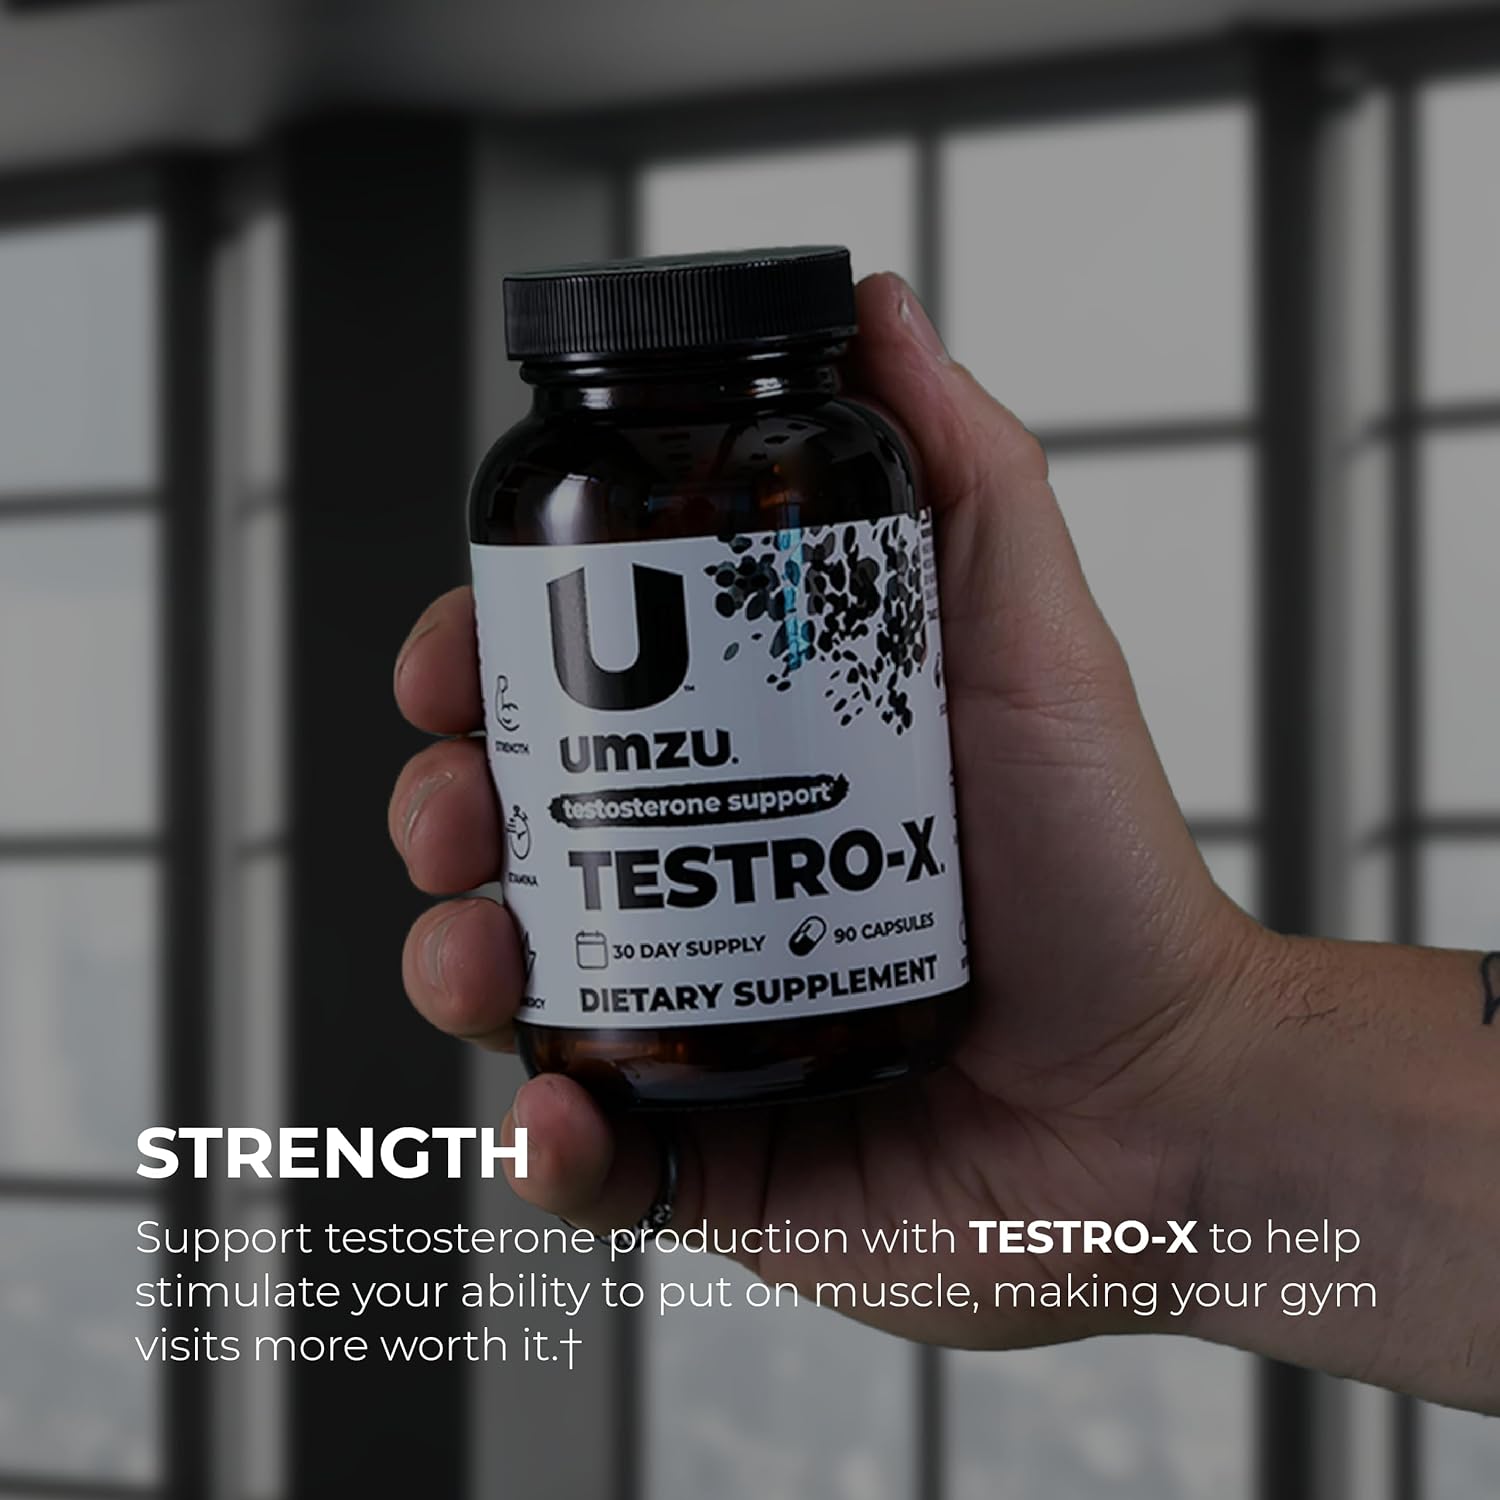 UMZU Testro-X - Testosterone Support Supplement to Support Healthy Testosterone Production, Blend of Vitamins, Minerals, and Herbs - (30 Day Supply 90 Capsules) : Health & Household